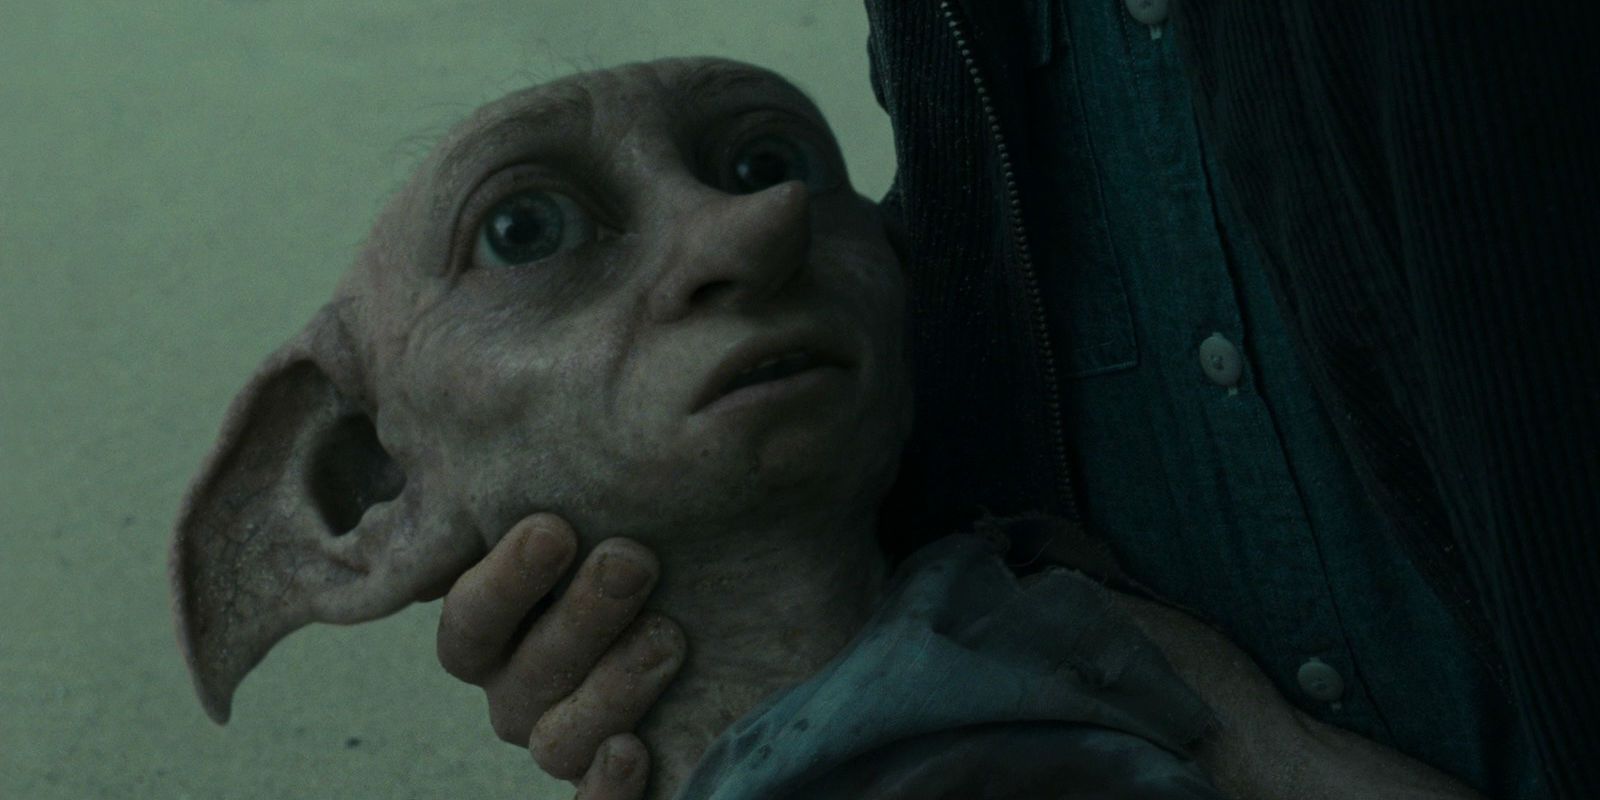 Dobbys death in Harry Potter and the Deathly Hallows